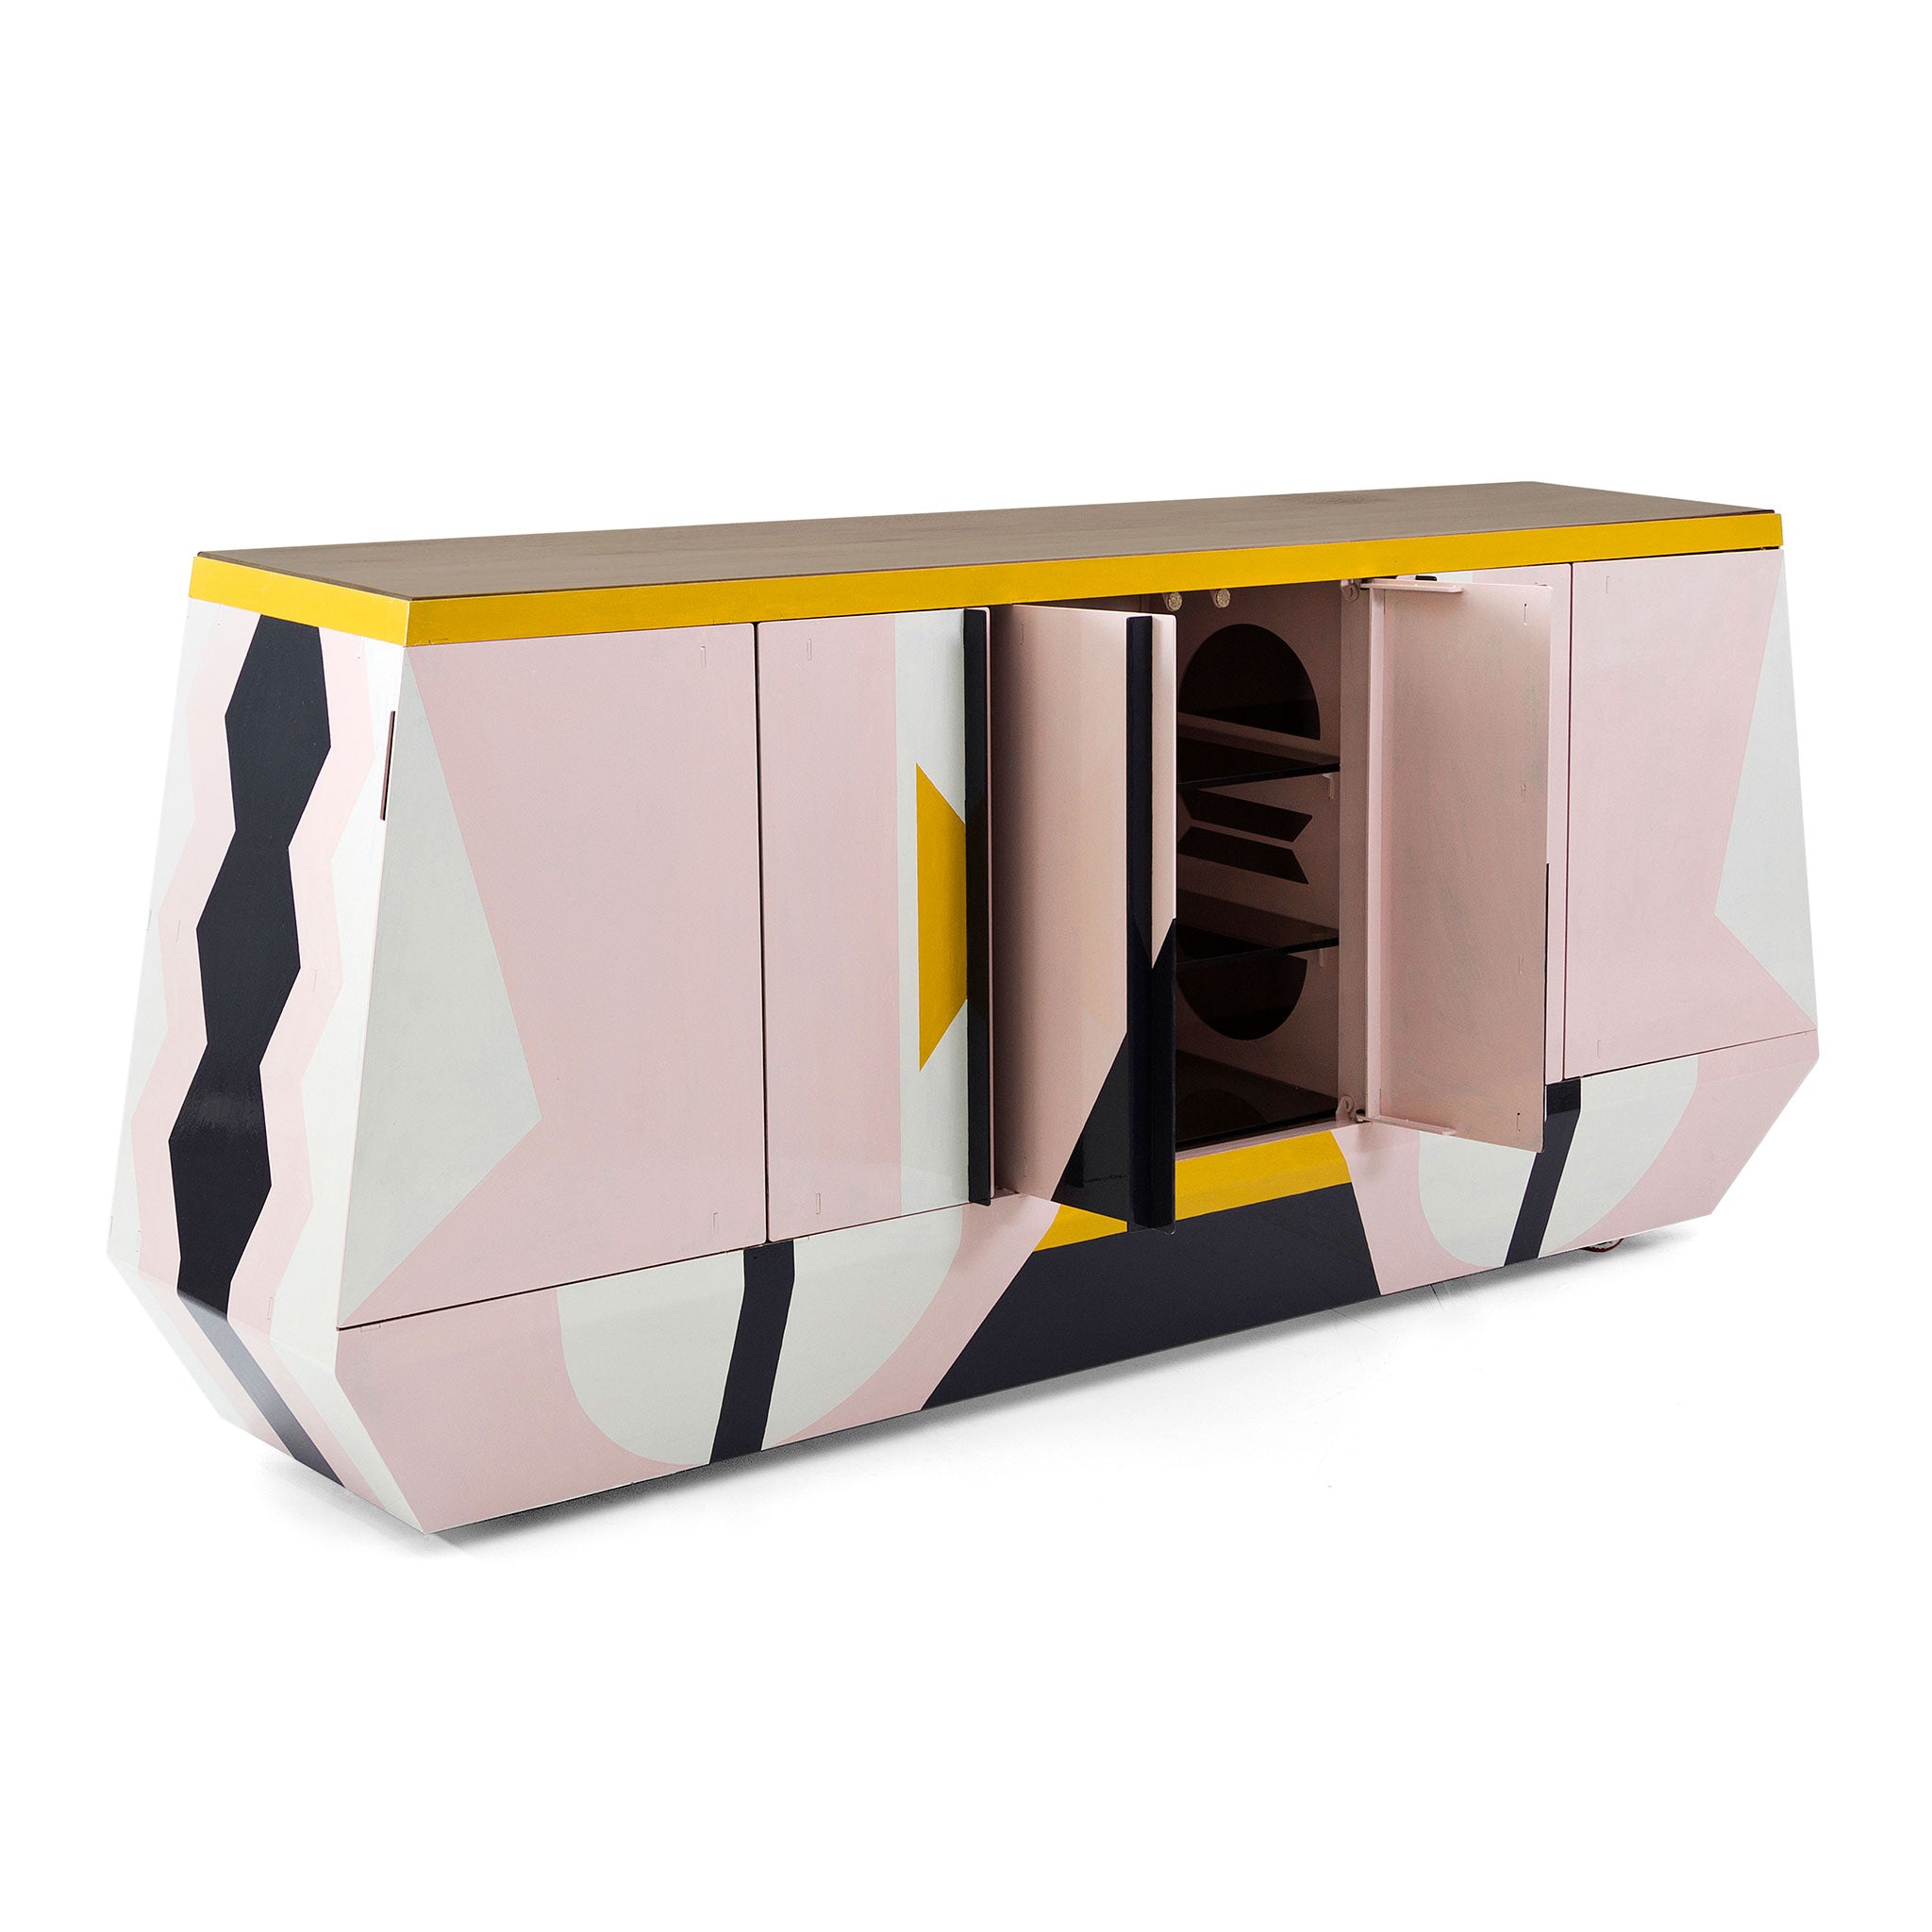 South African handmade collectable interior furniture design